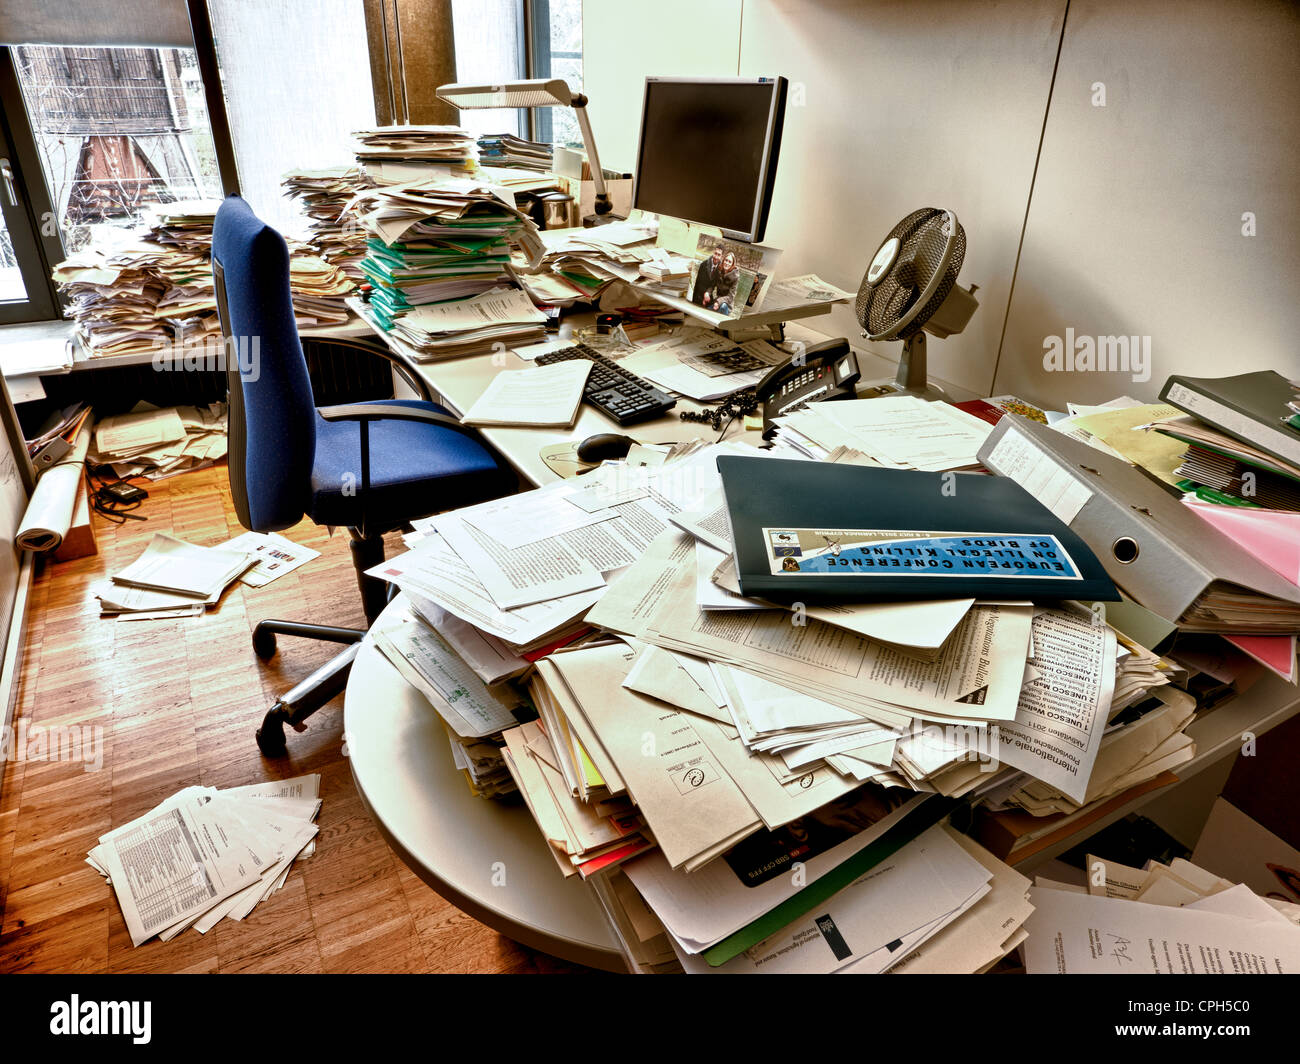 A4, office, records, documents, pile of documents, stack of documents, working environment, working world, labor organiz Stock Photo Alamy